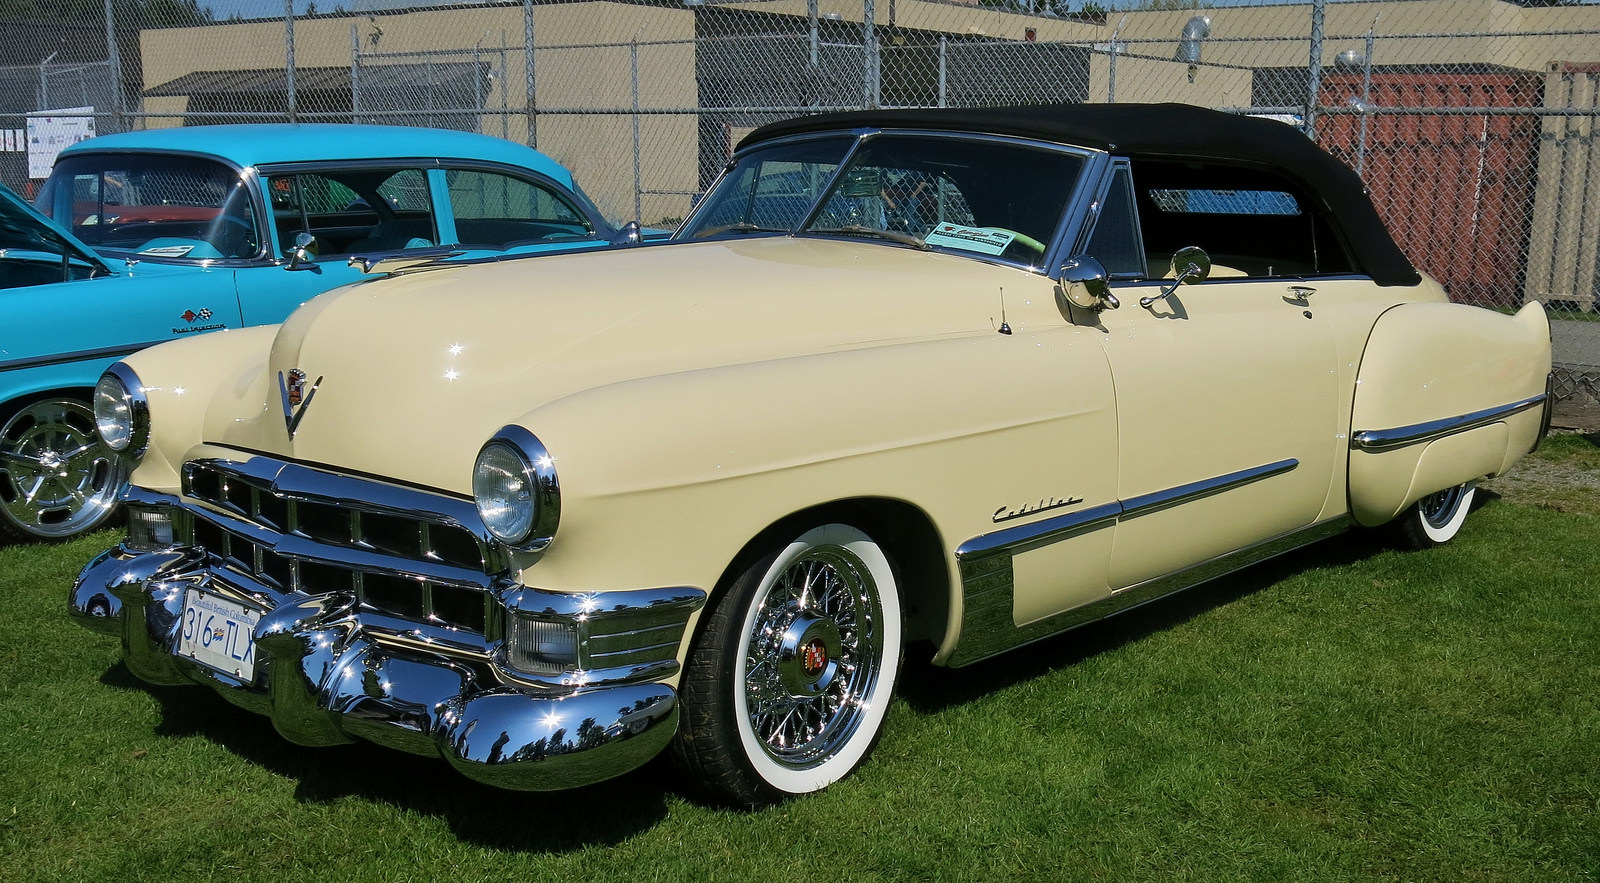 1949 Cadillac Sixty-two Convertible Backgrounds, Compatible - PC, Mobile, Gadgets| 1600x883 px